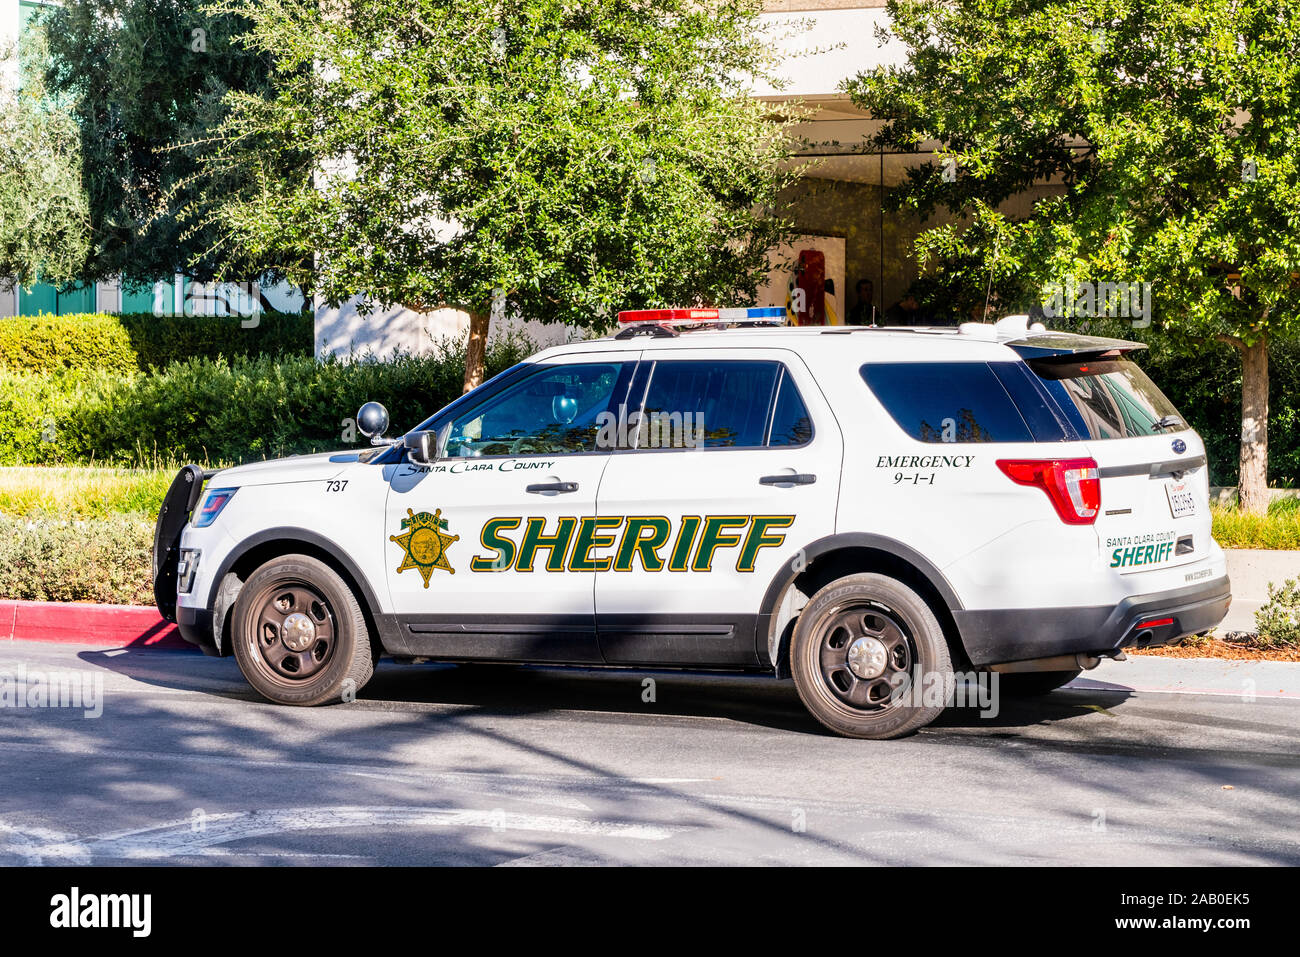 Nov 3, 2019 Cupertino / CA / USA - Santa Clara County Police Sheriff car parked on Apple Infinity Loop Campus, Silicon Valley Stock Photo